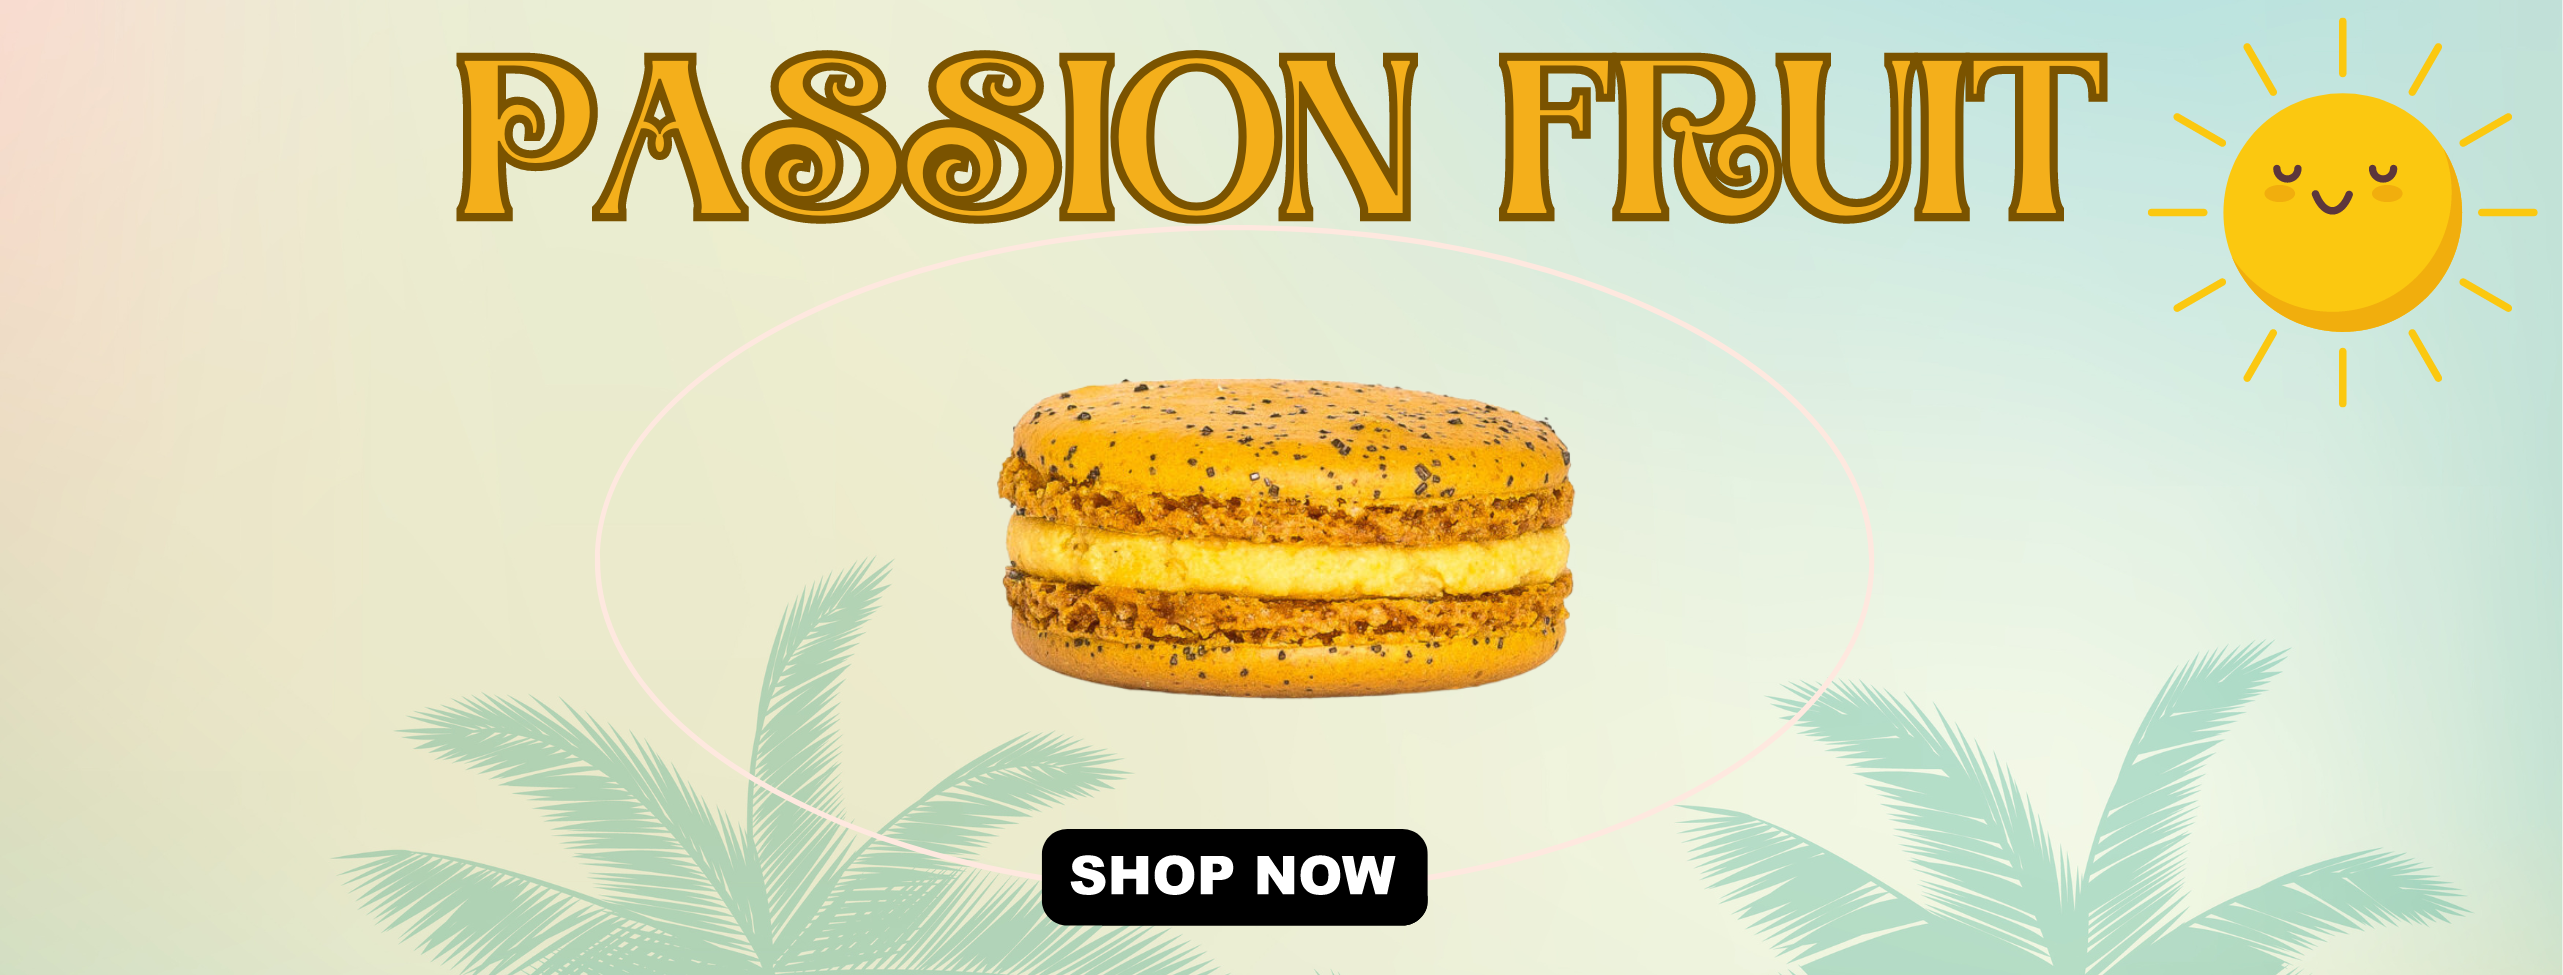 PASSION FRUIT BANNER